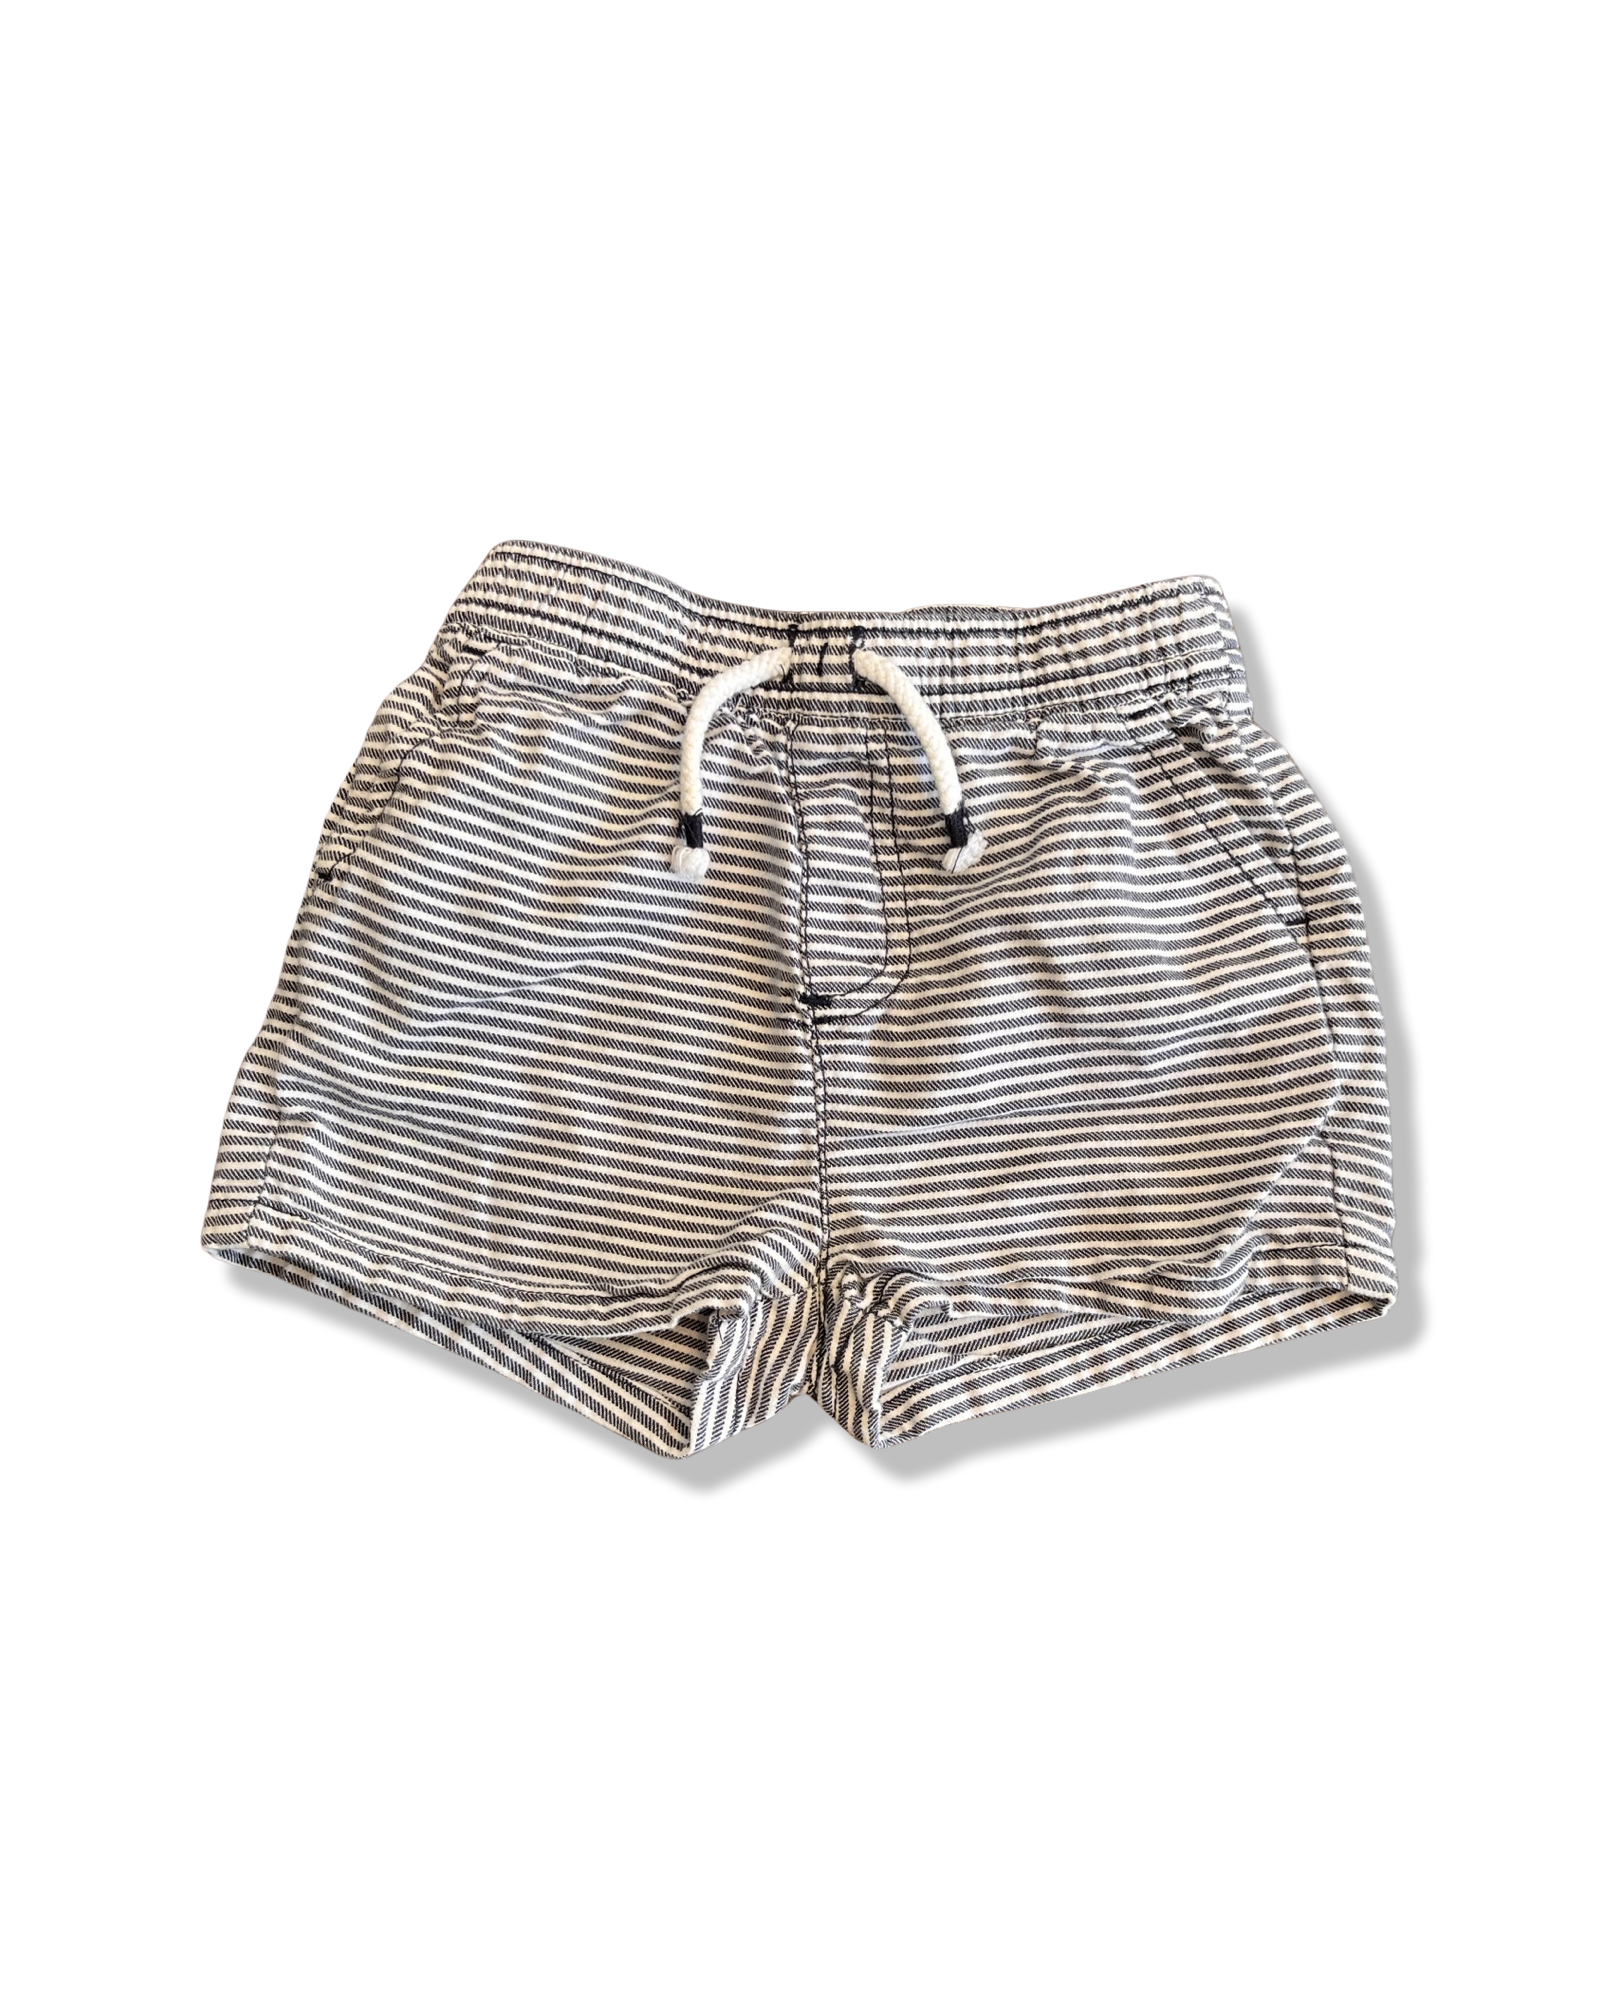 Seed Navy and White Striped Shorts (12-18M)